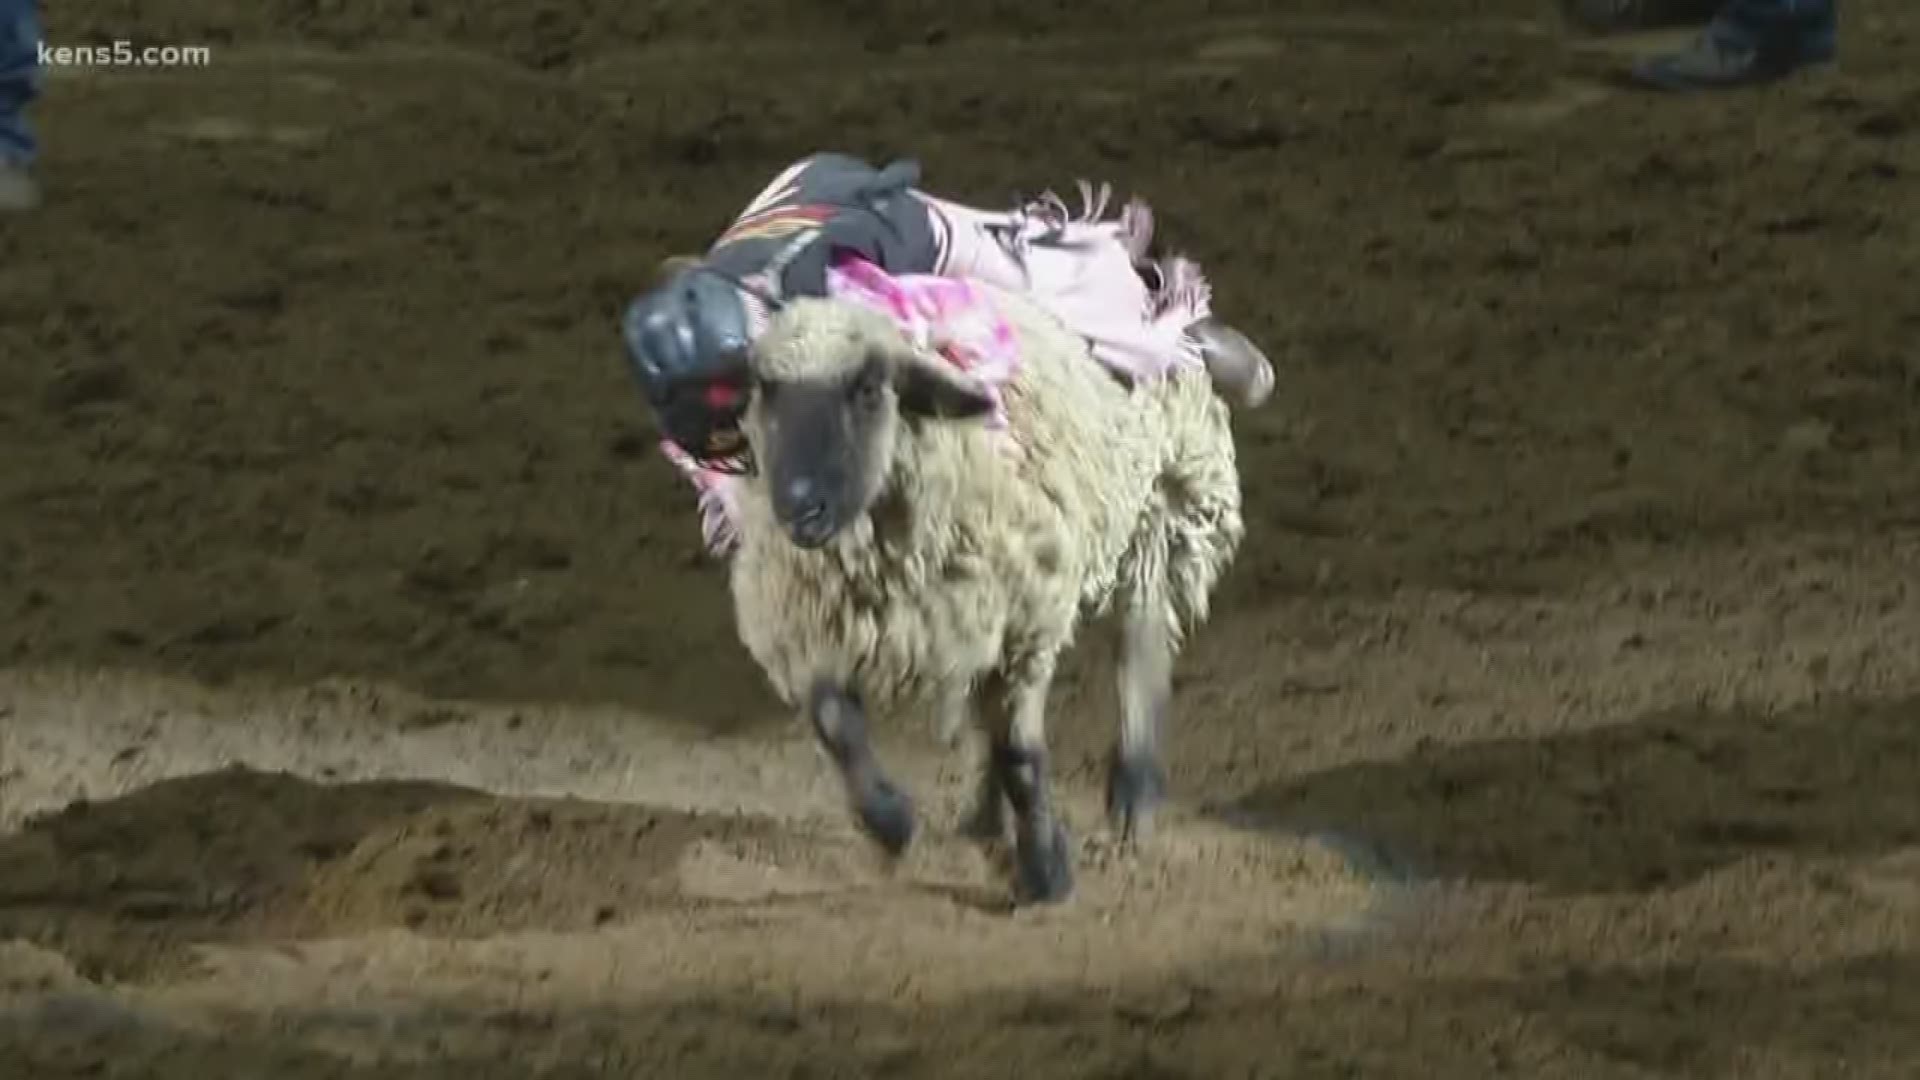 Be sure to tune in every night at 10 pm for Mutton Bustin' highlights from the San Antonio Rodeo!